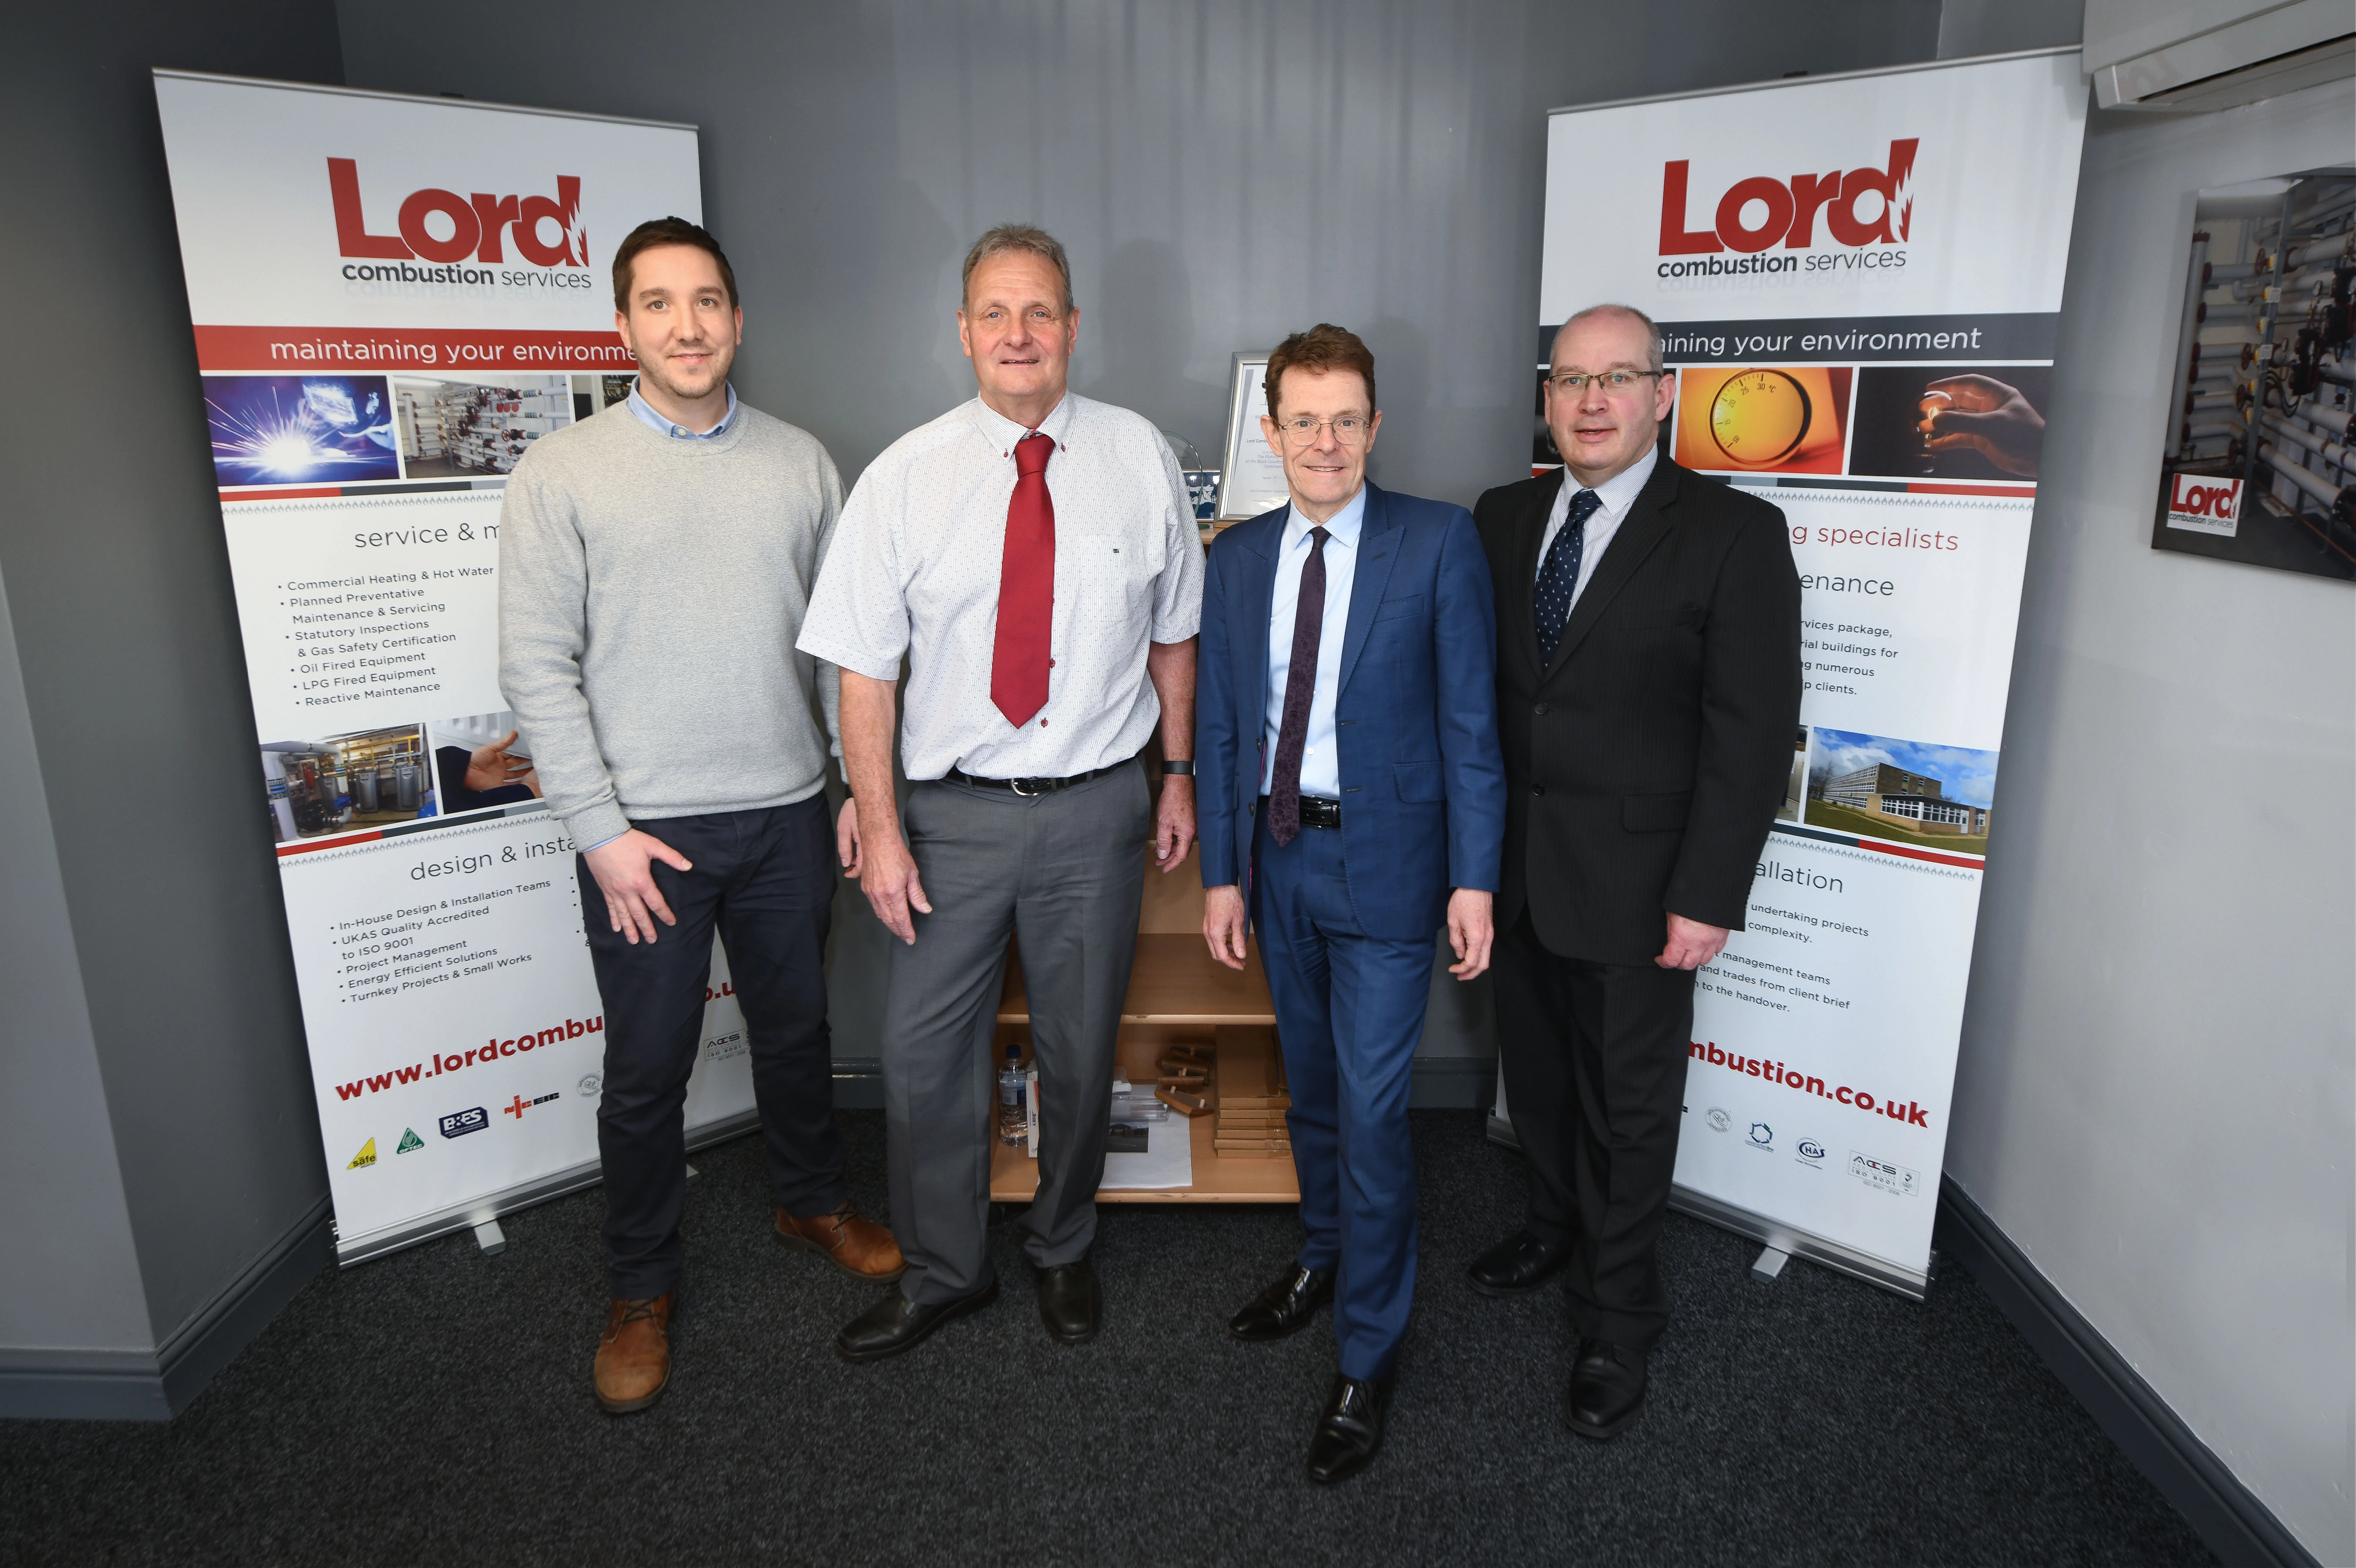 From left, Lord Combustion Services directors Greg Jones and Mark Chapman, West Midlands Mayor Andy Street and Lord MD Stuart Smith 